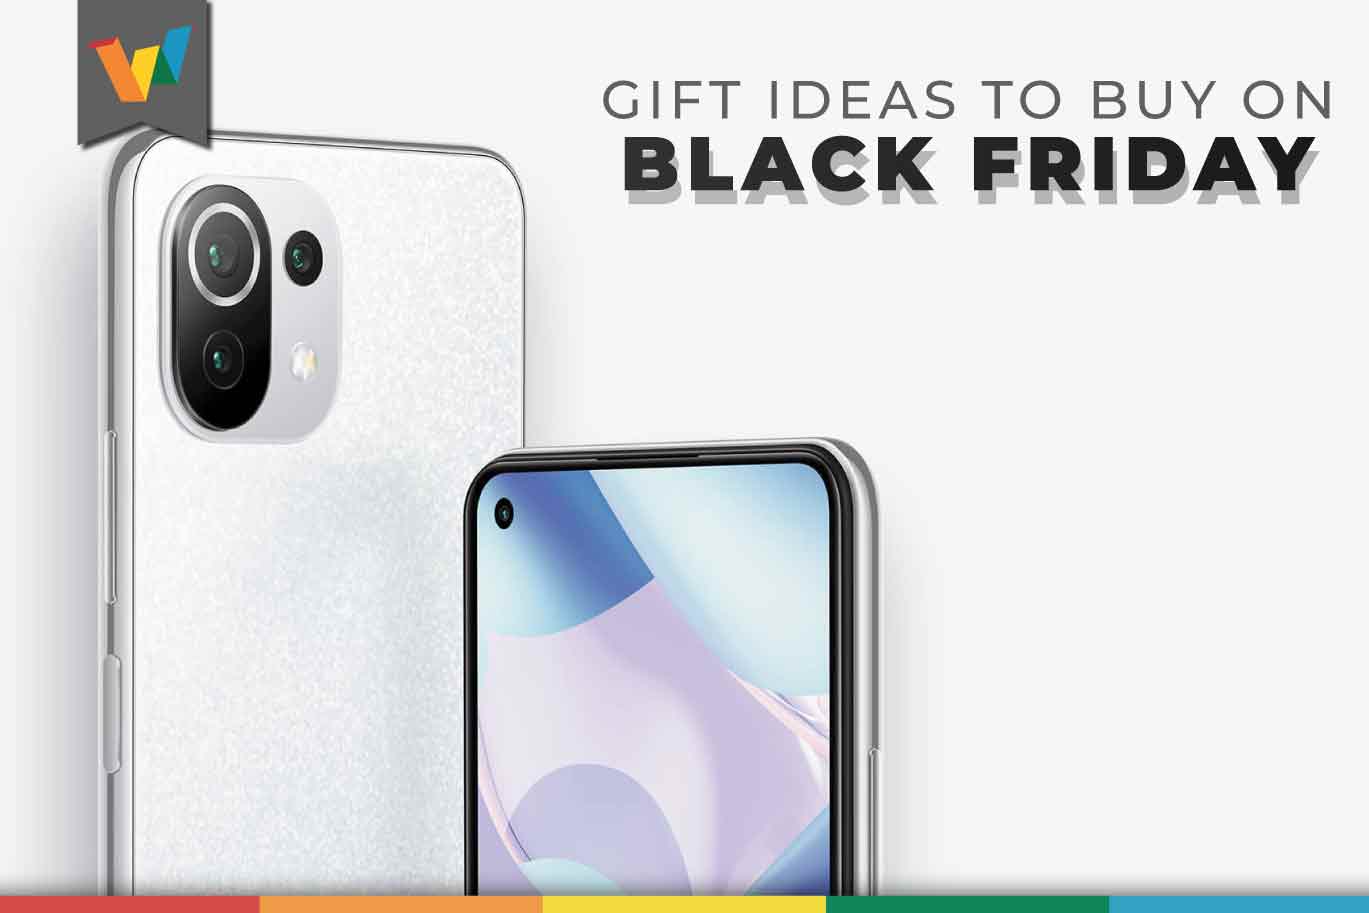 Gift ideas to buy on Black Friday